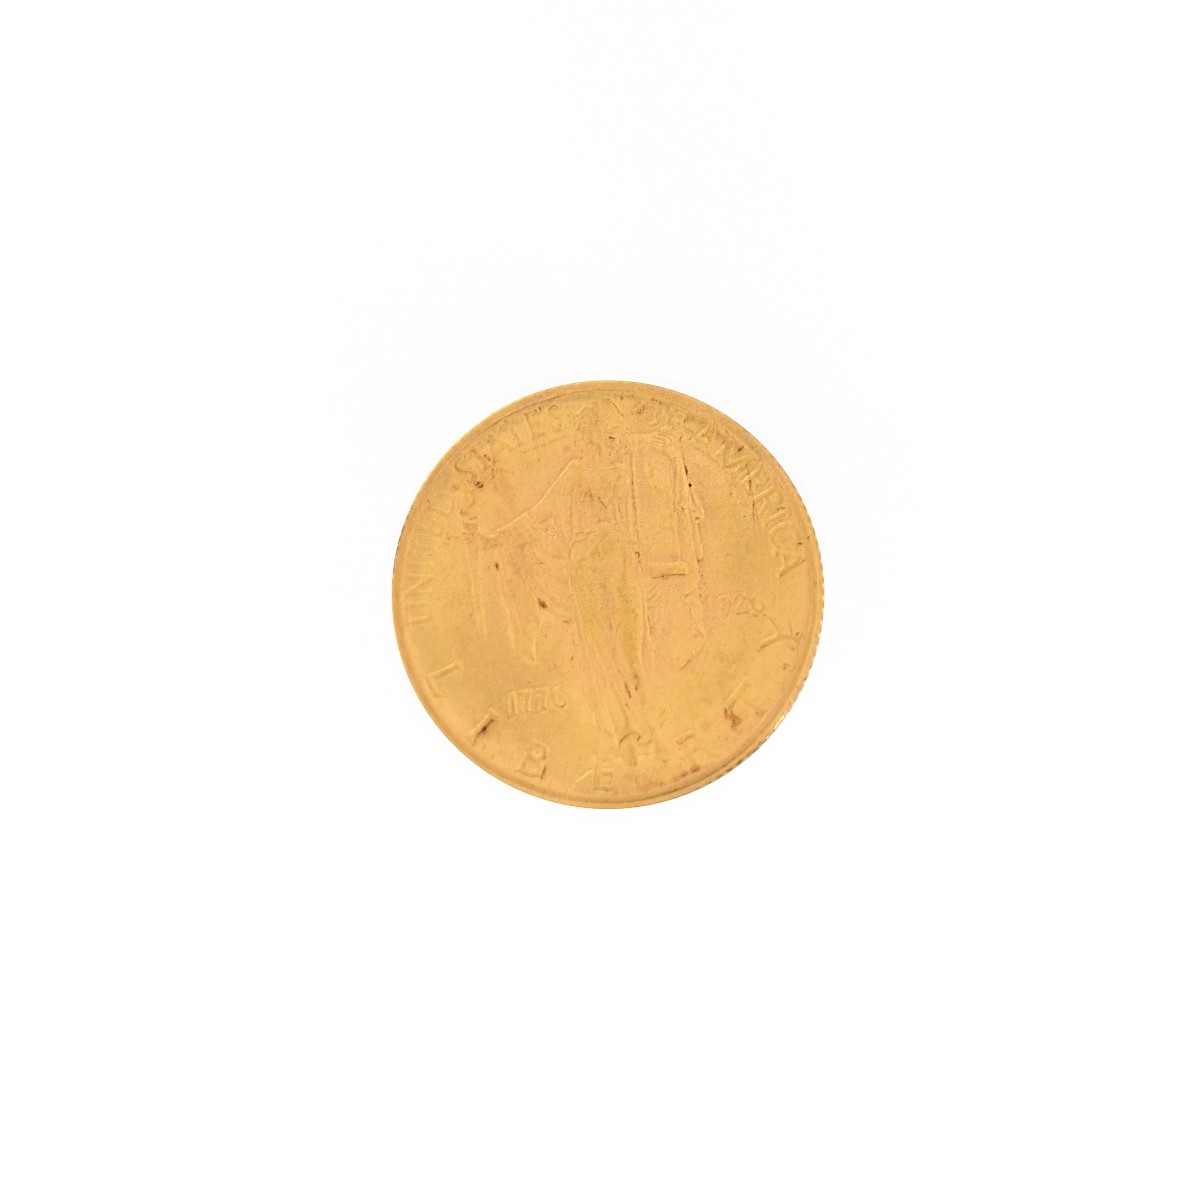 US 1926 $2-1/2 Gold Coin